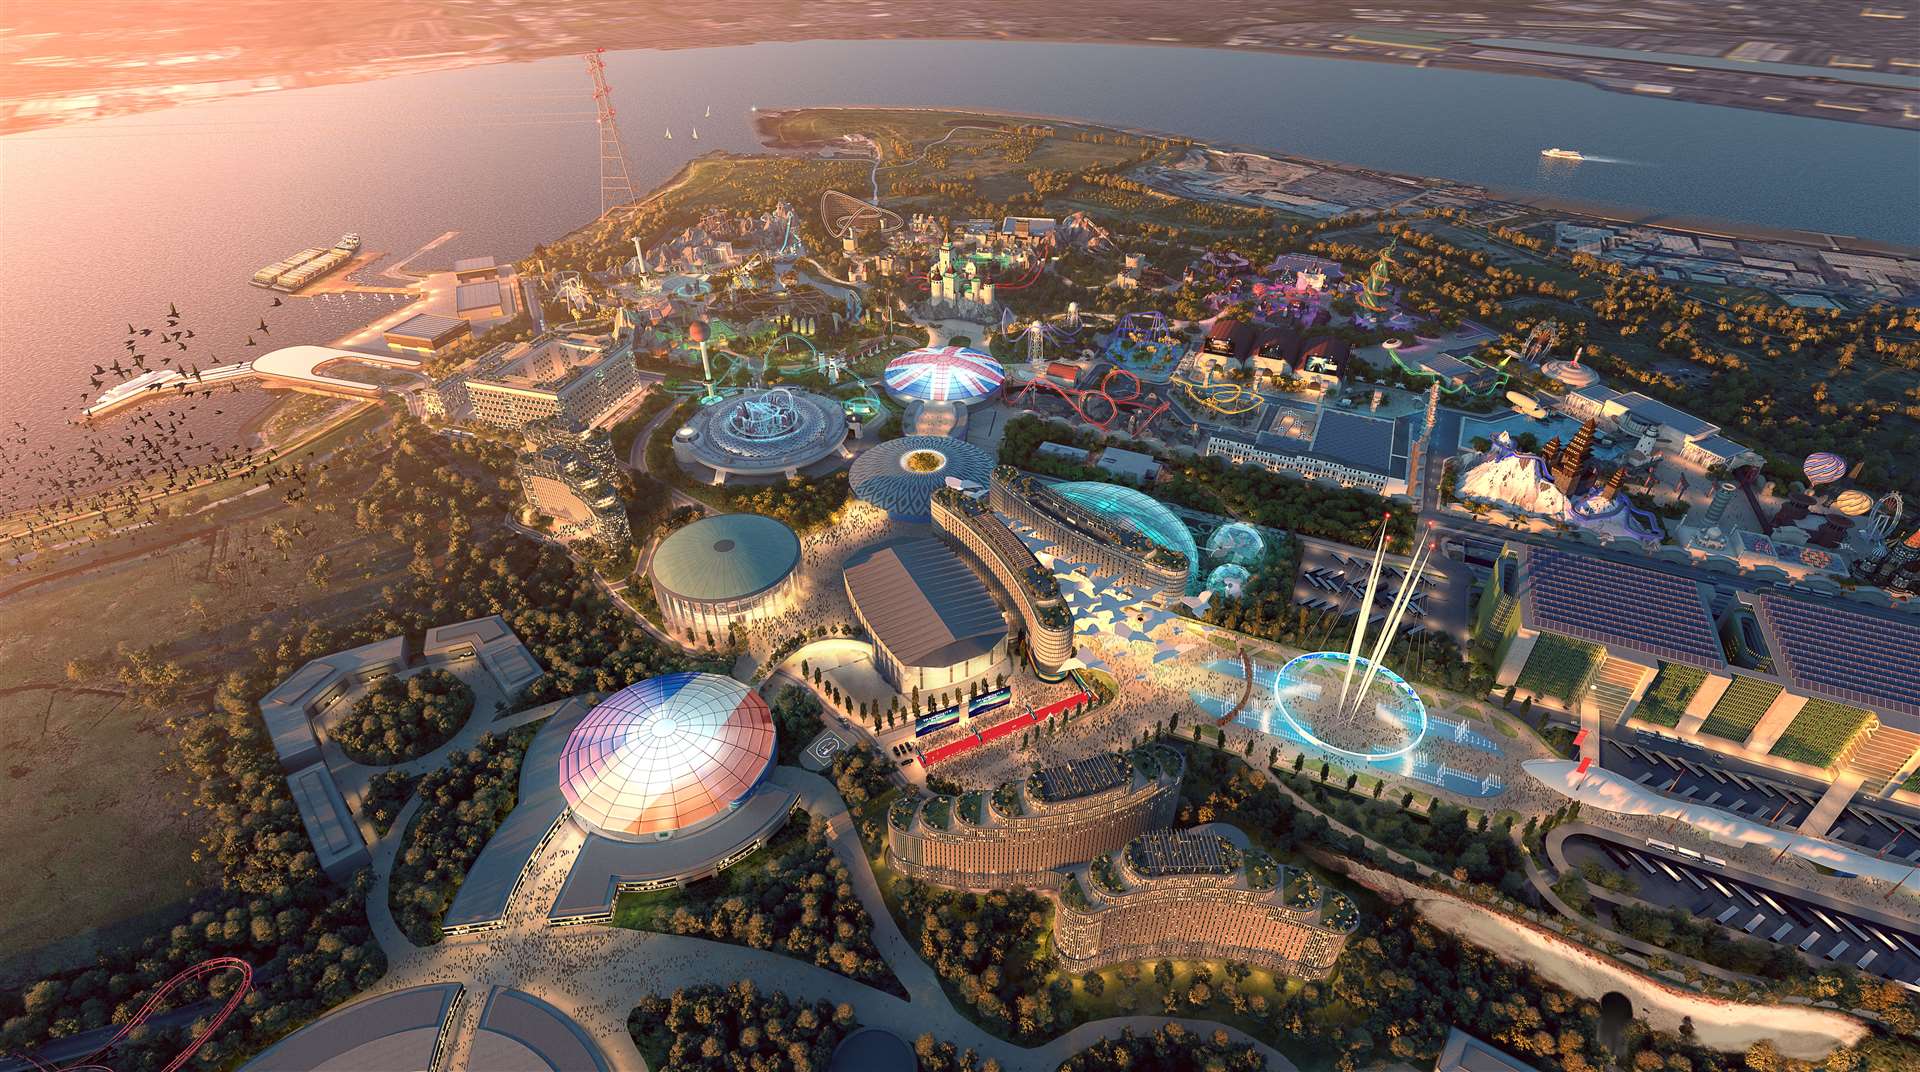 A detailed artist's impression of what the London Resort theme park will look like